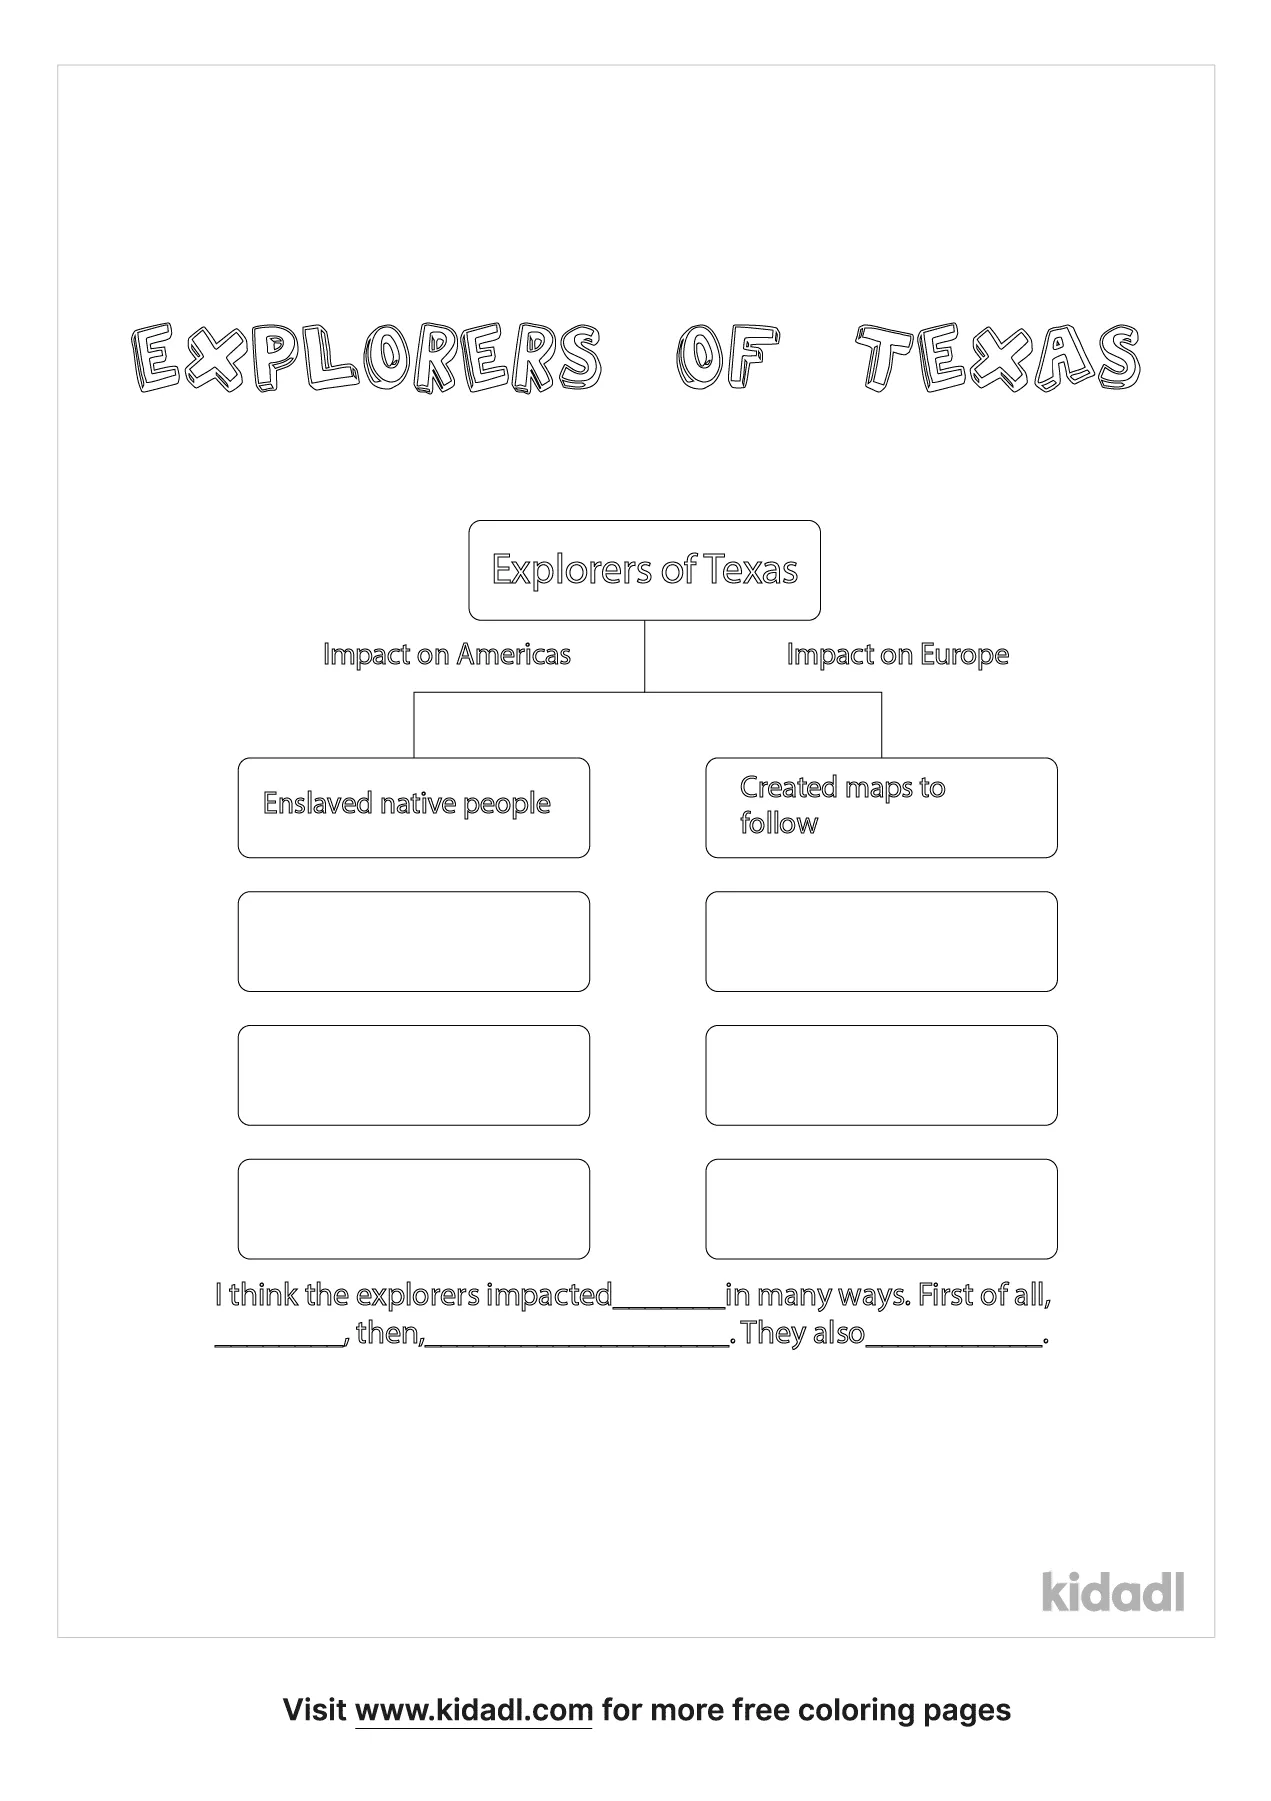 Texas Explorers Coloring Page